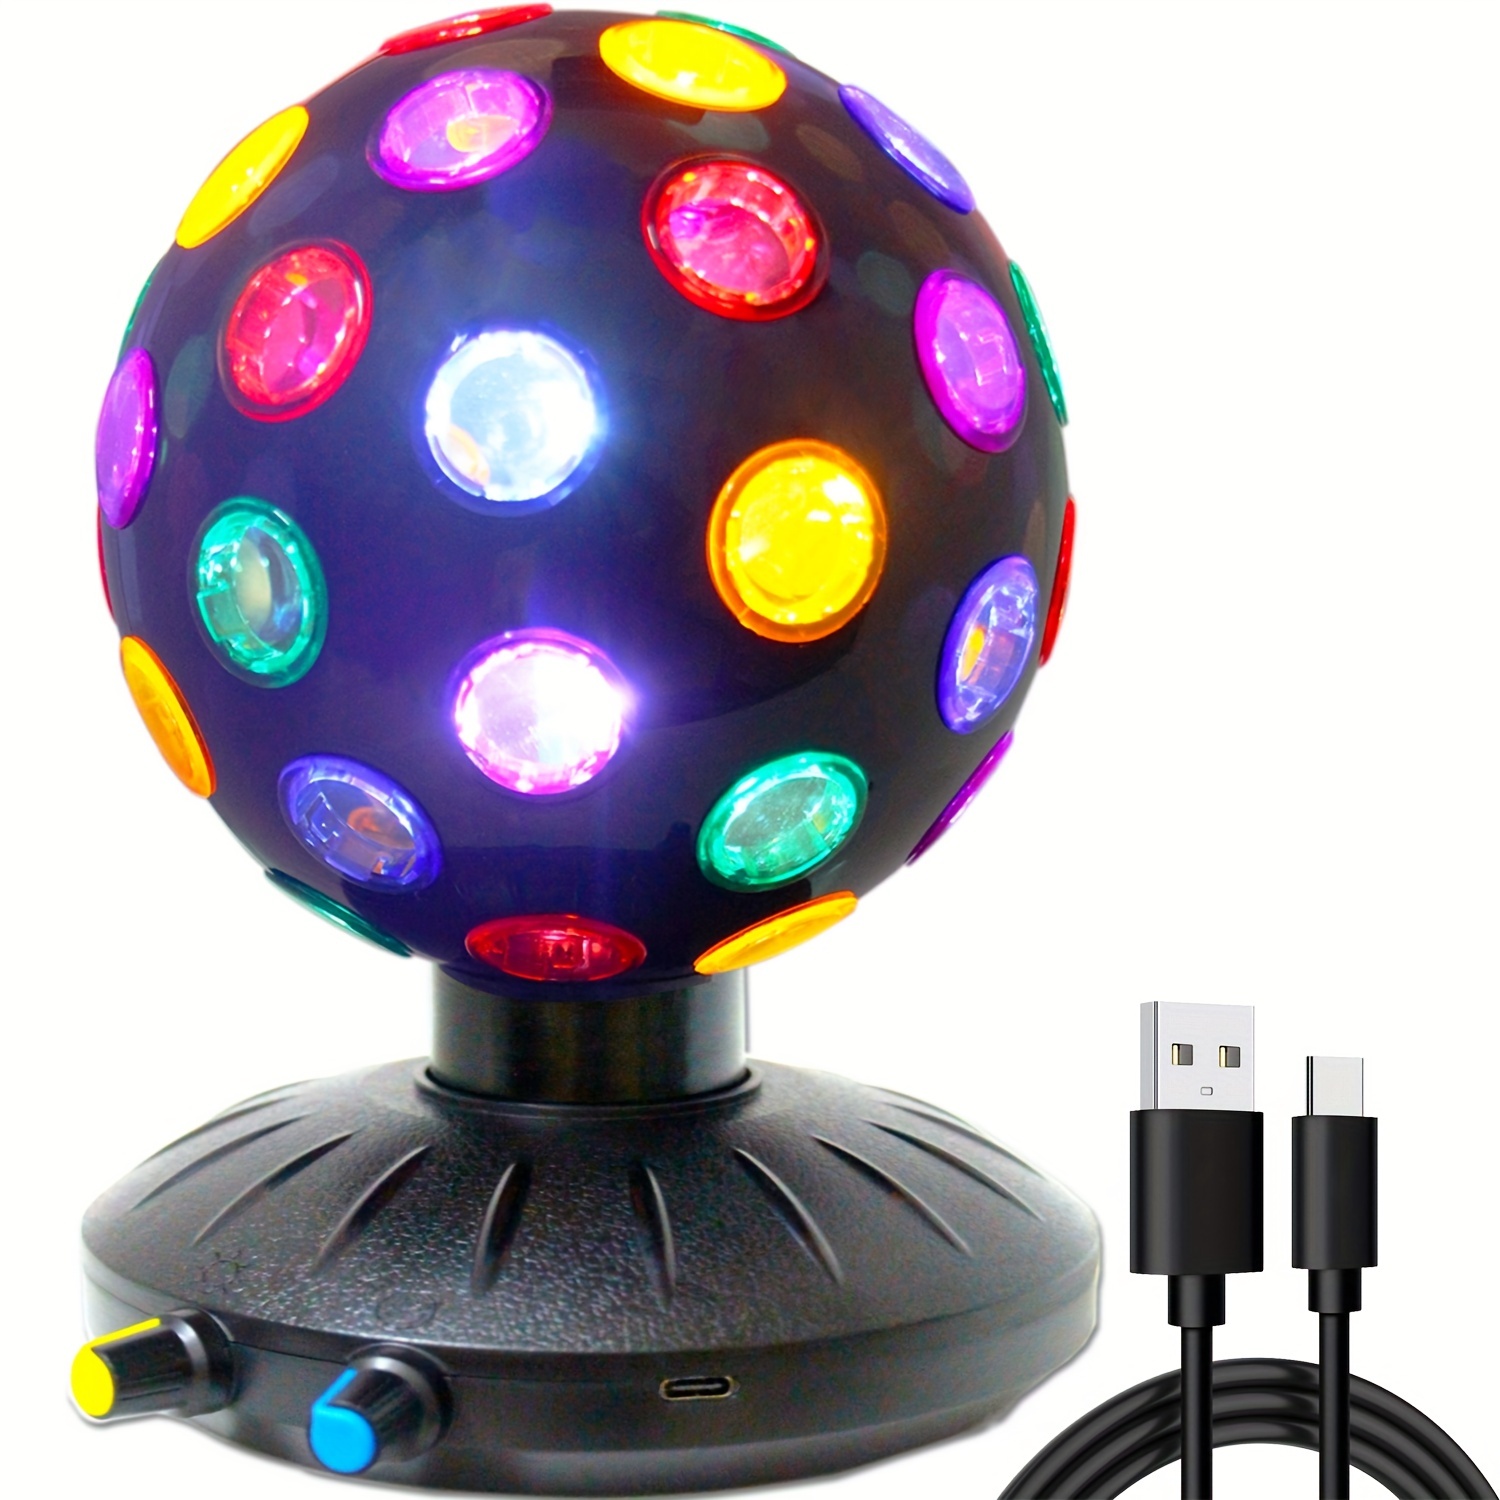 LUMI SOURCE- Spinning Disco Ball with LED Lights - for Parties, Lighting